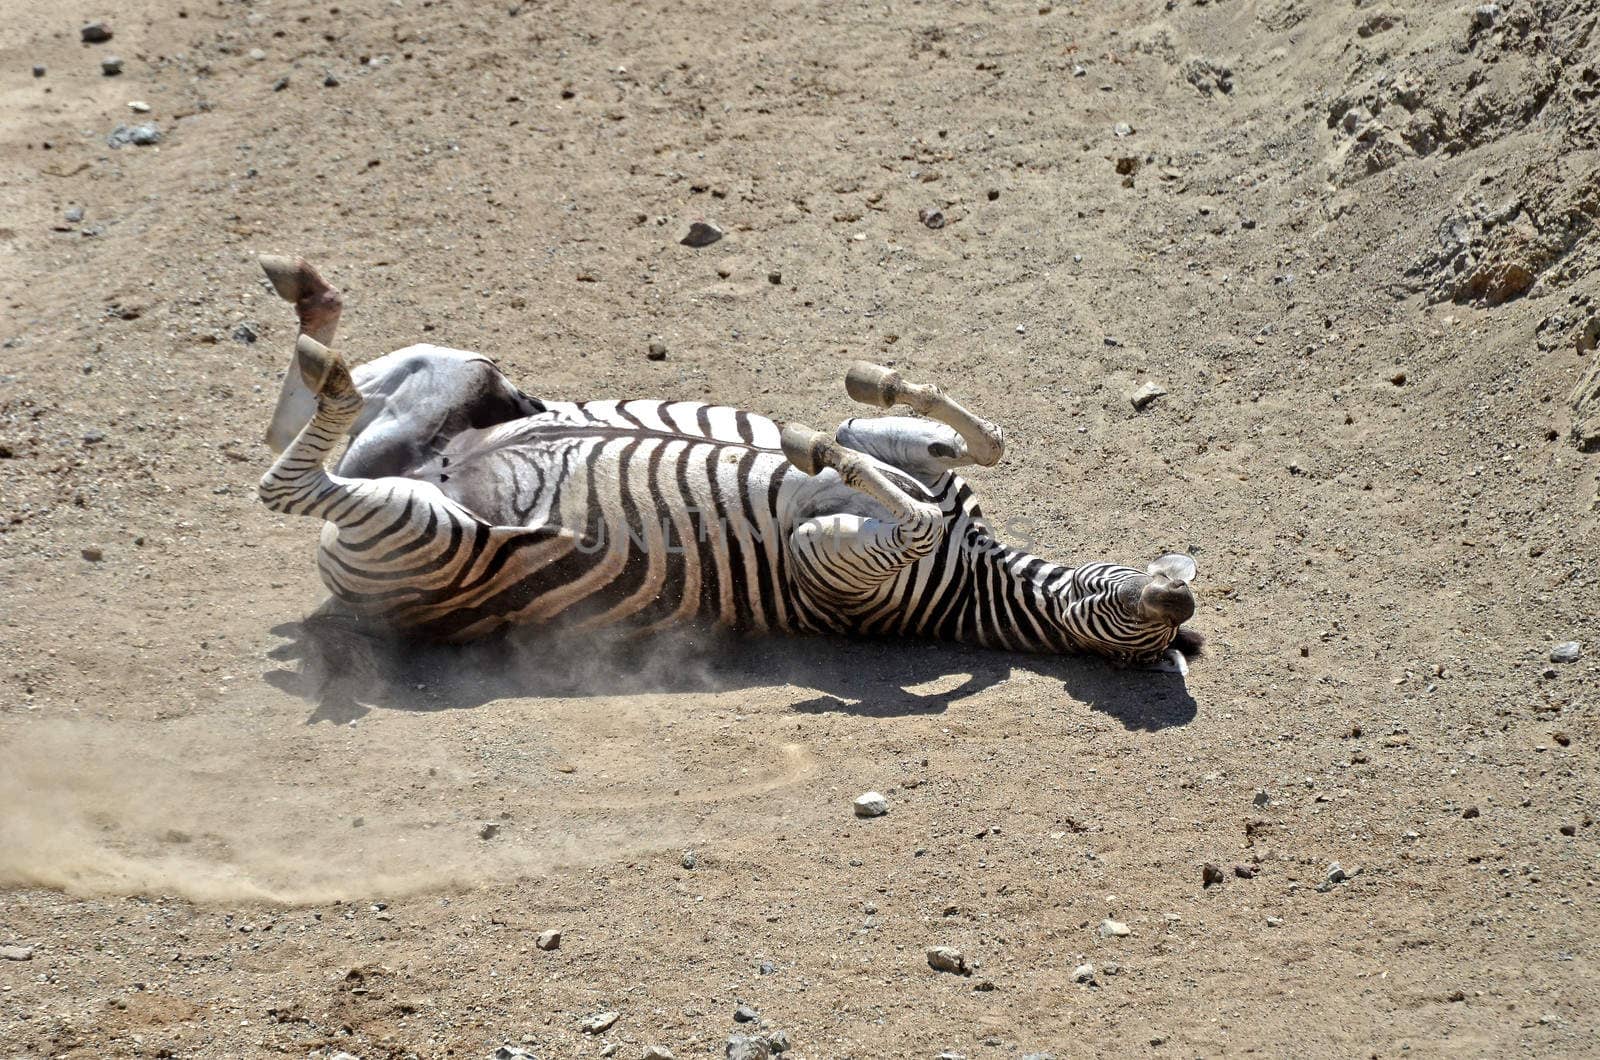 A zebra scratching the back on the ground.